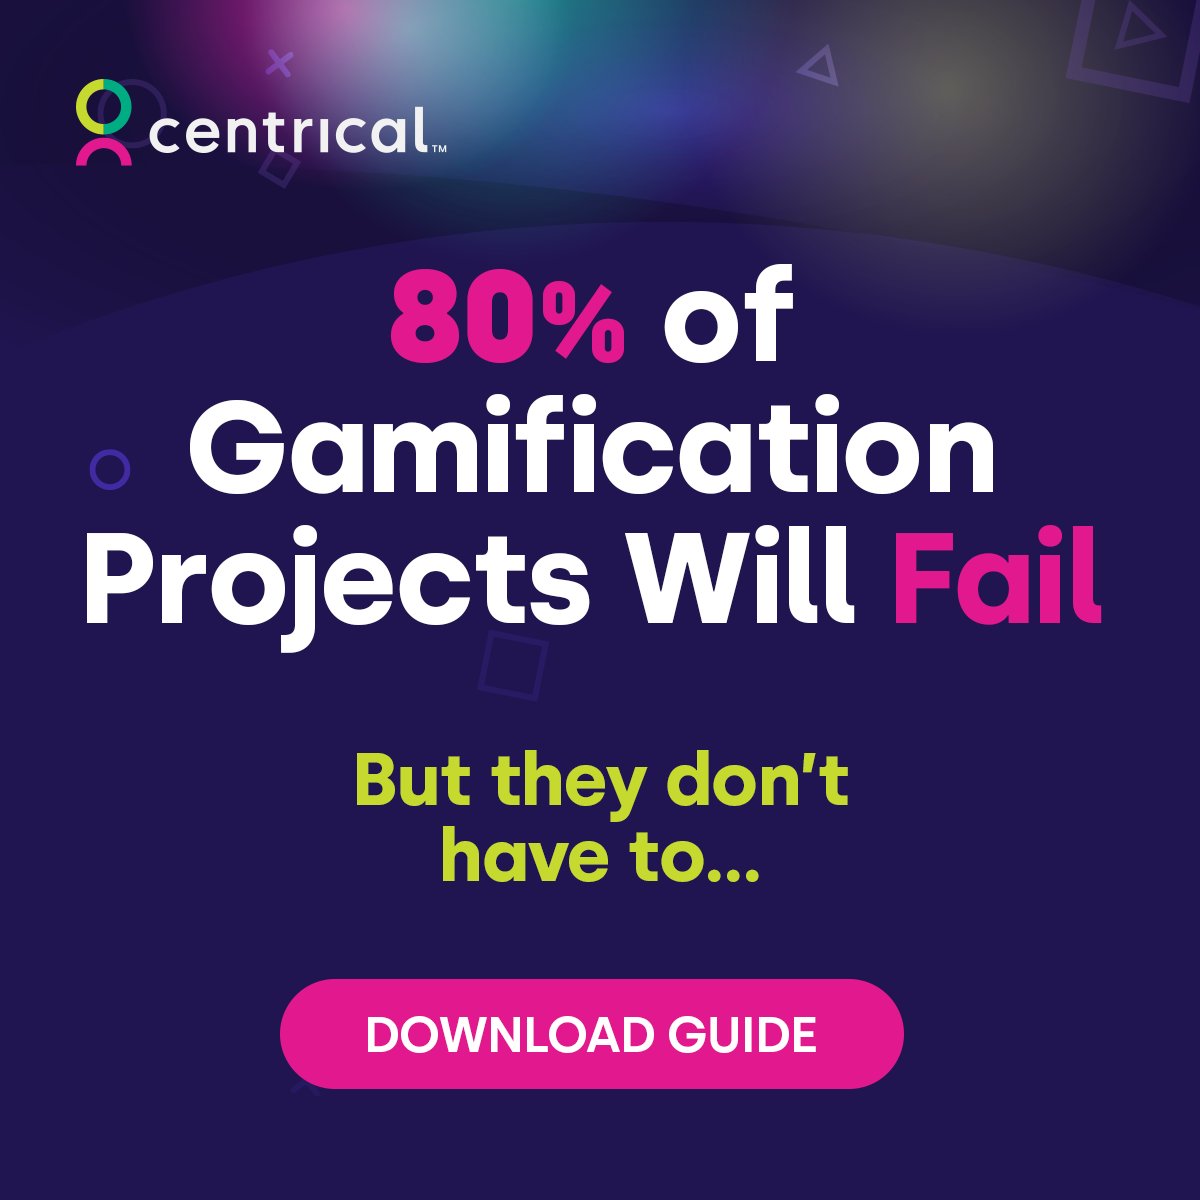 According to Gartner research, 80% of gamification projects will fail. GAME OVER to a standalone gamification strategy. Learn more about why most gamification projects fail: centrical.com/resources/game… #gamification #employeeexperience